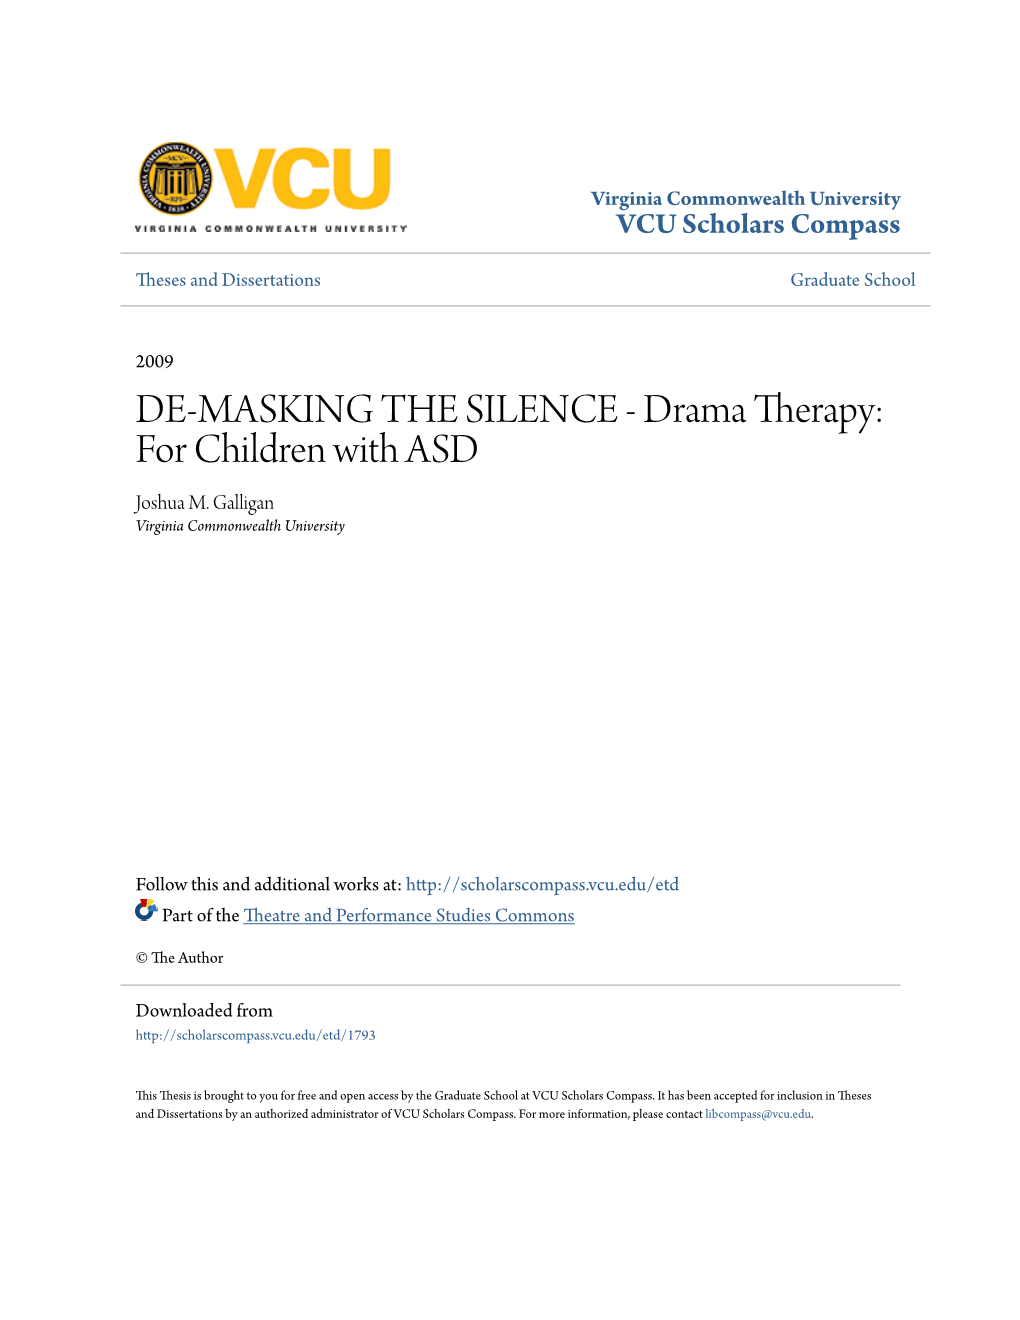 Drama Therapy: for Children with ASD Joshua M